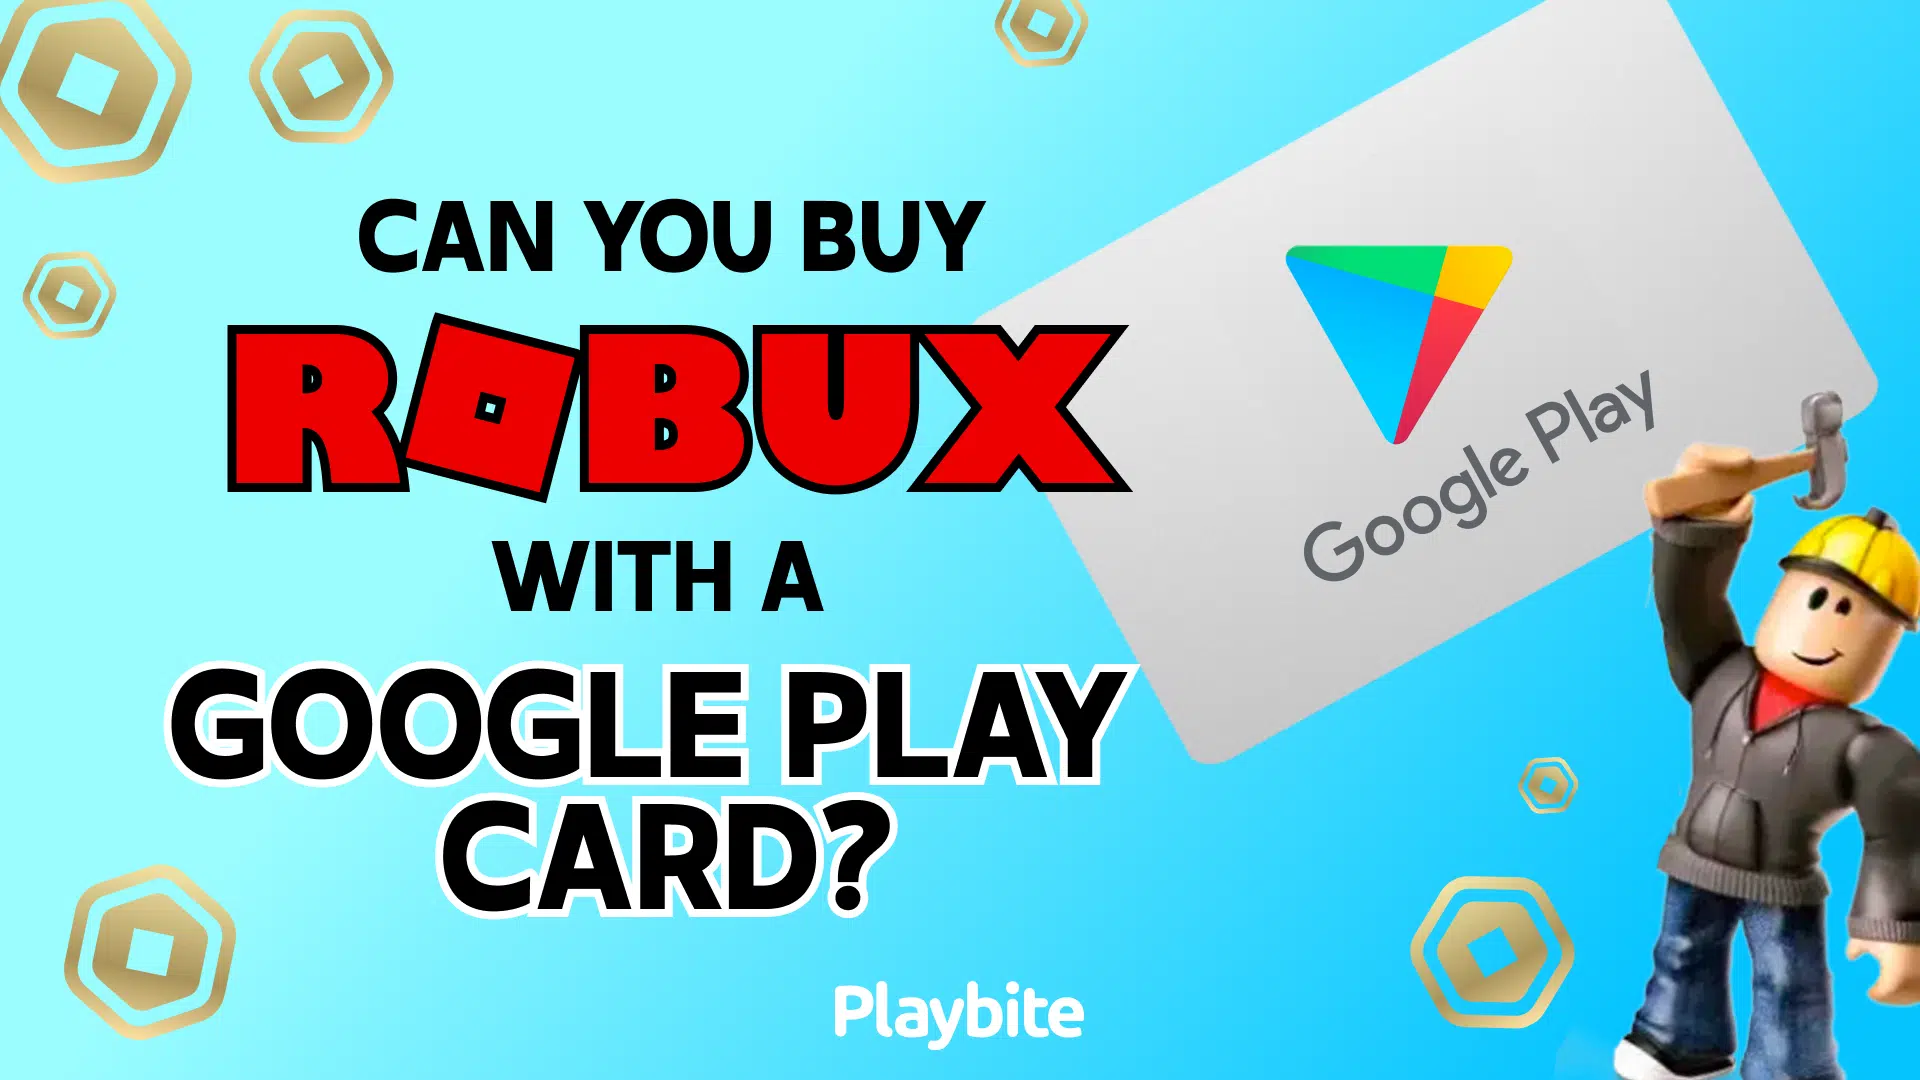 Can You Buy Robux With a Google Play Card?